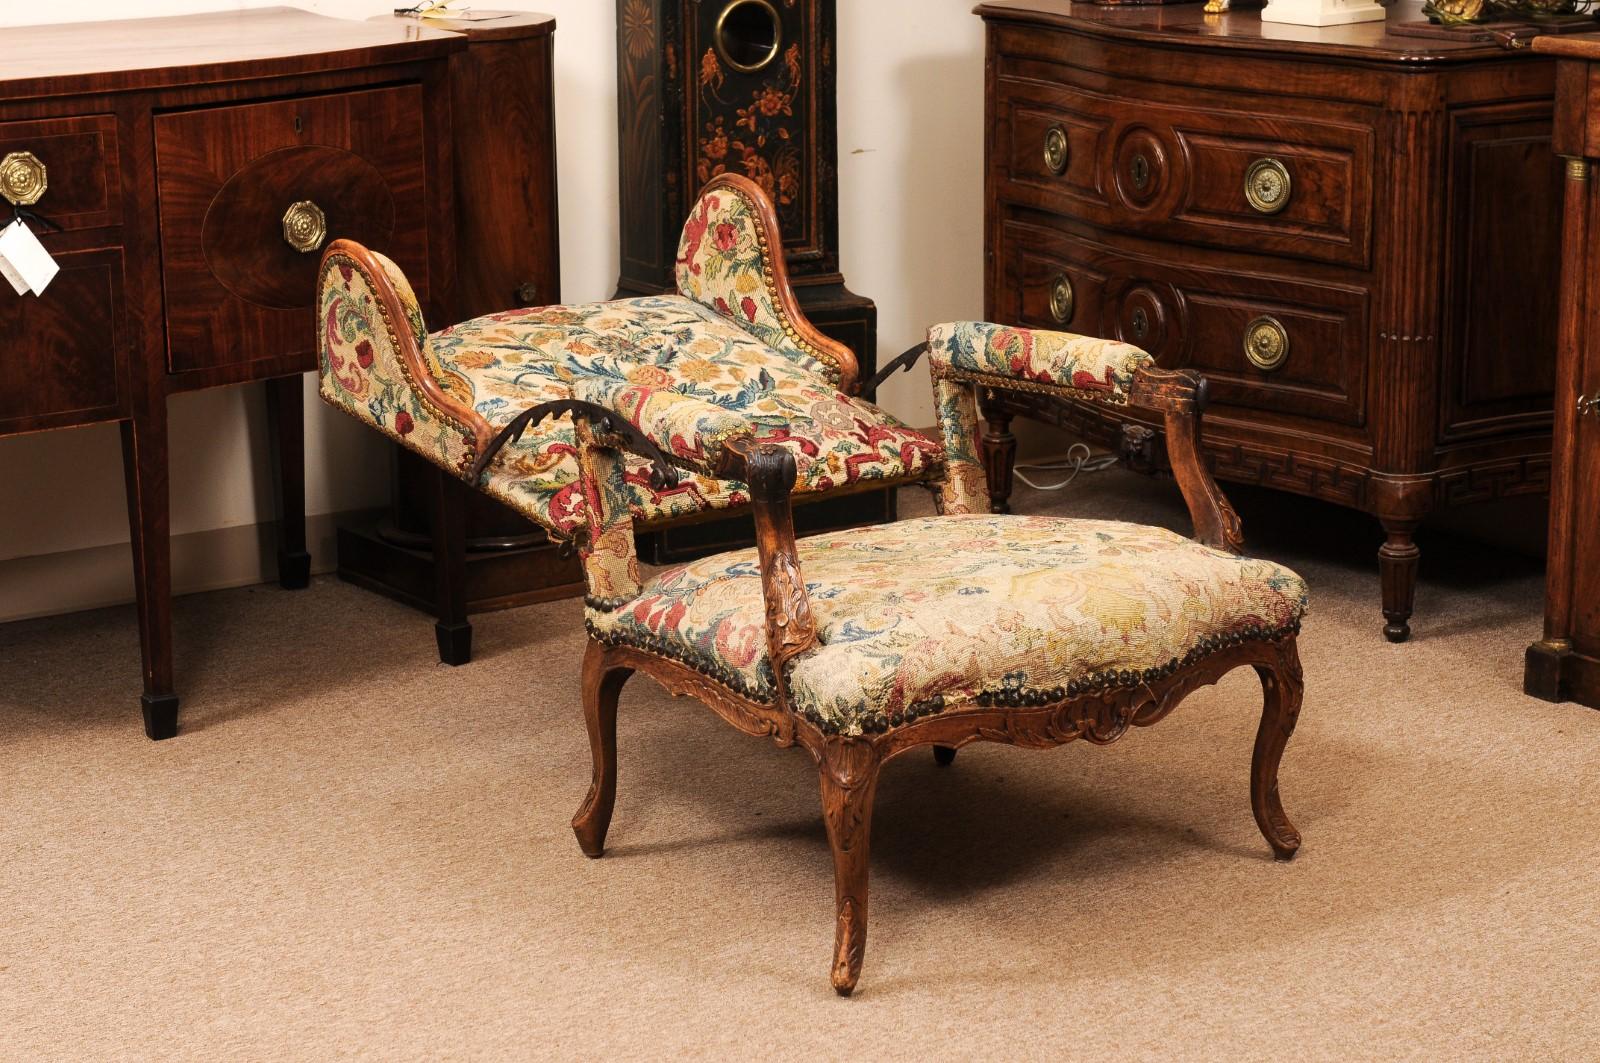 Early 18th Century French Regence Period Walnut Ratchet Wing Chair with Needlewo For Sale 1